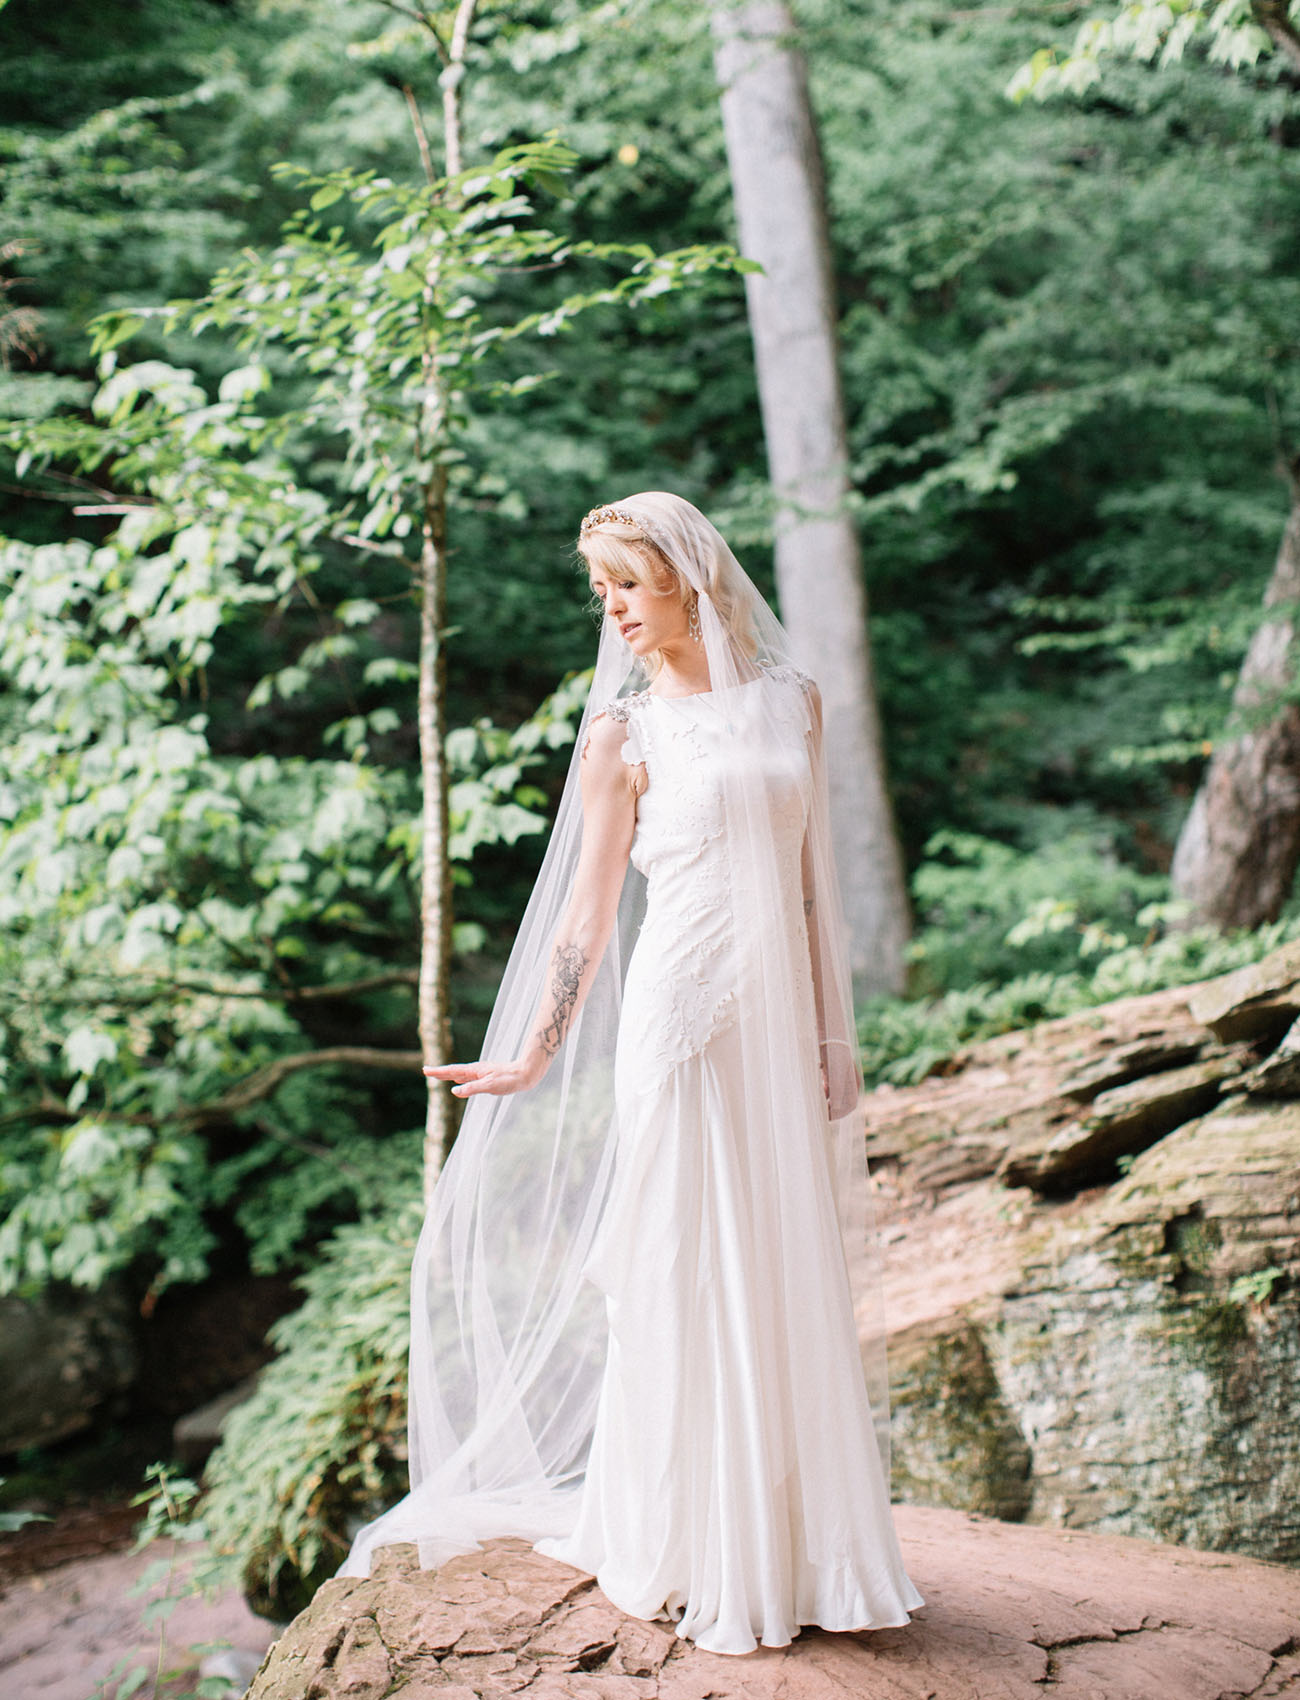 The bride was wearing a Carol Hannah gown with lace appliques and jeweled cap sleeves, a long veil